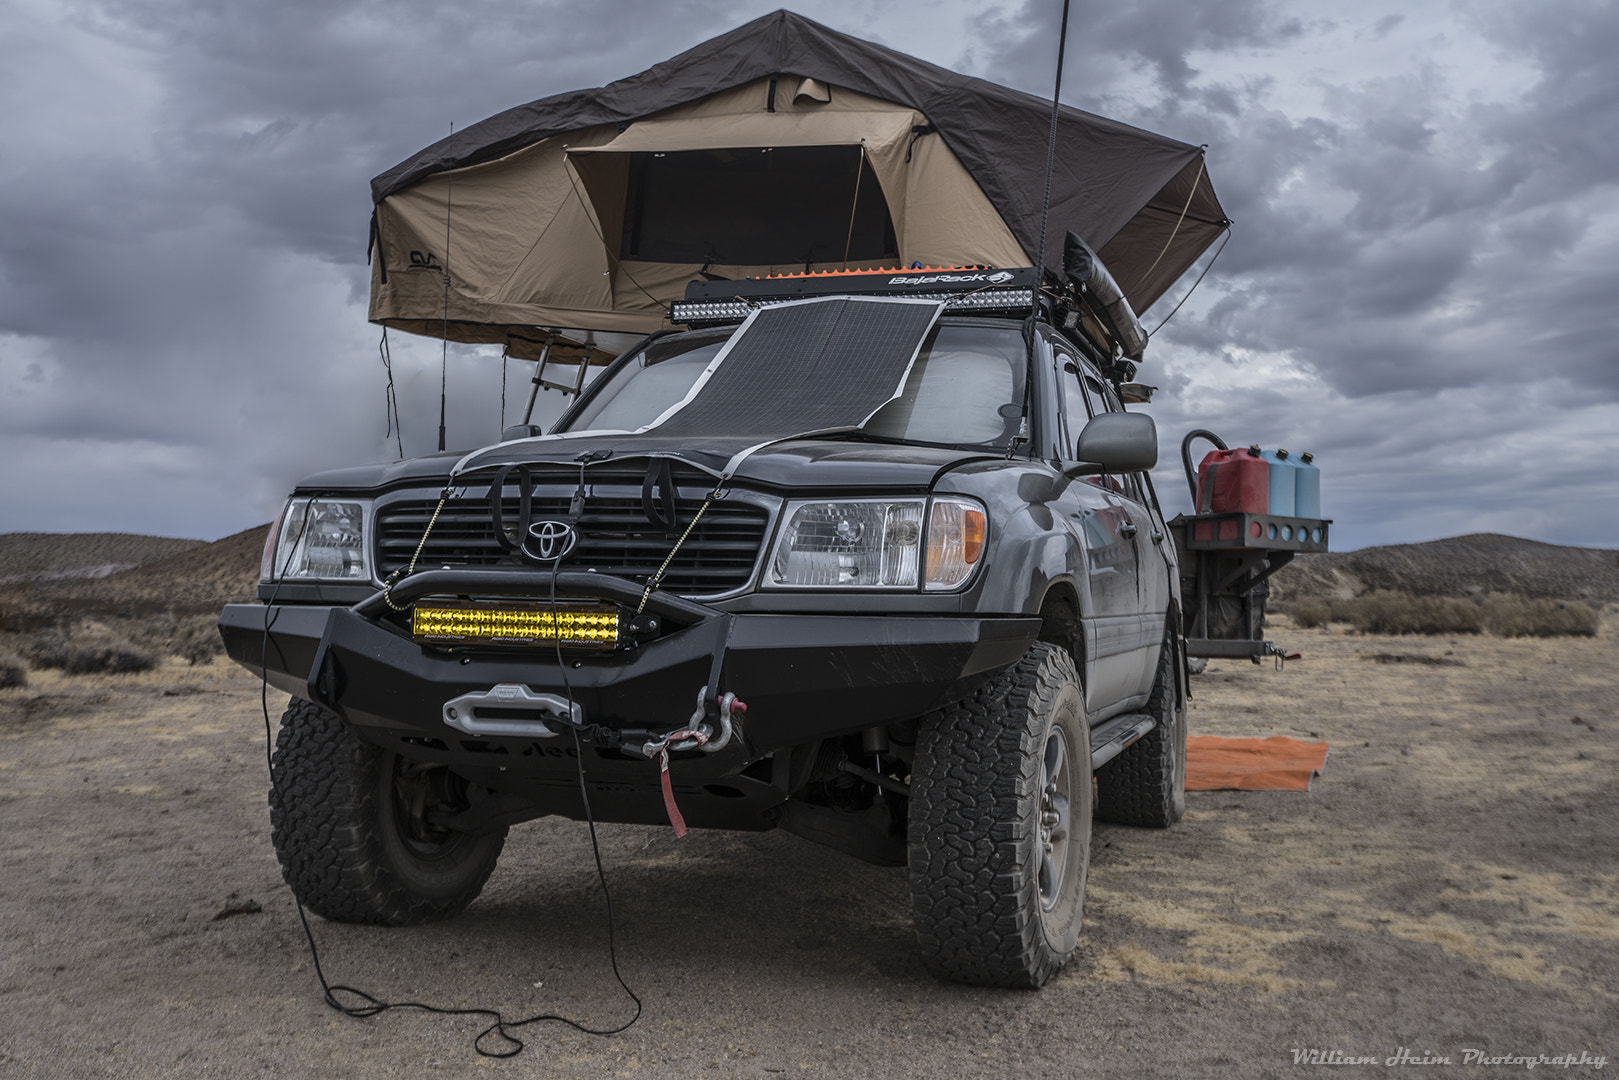 Sony a7R II sample photo. Who wants to play in my truck fort? photography